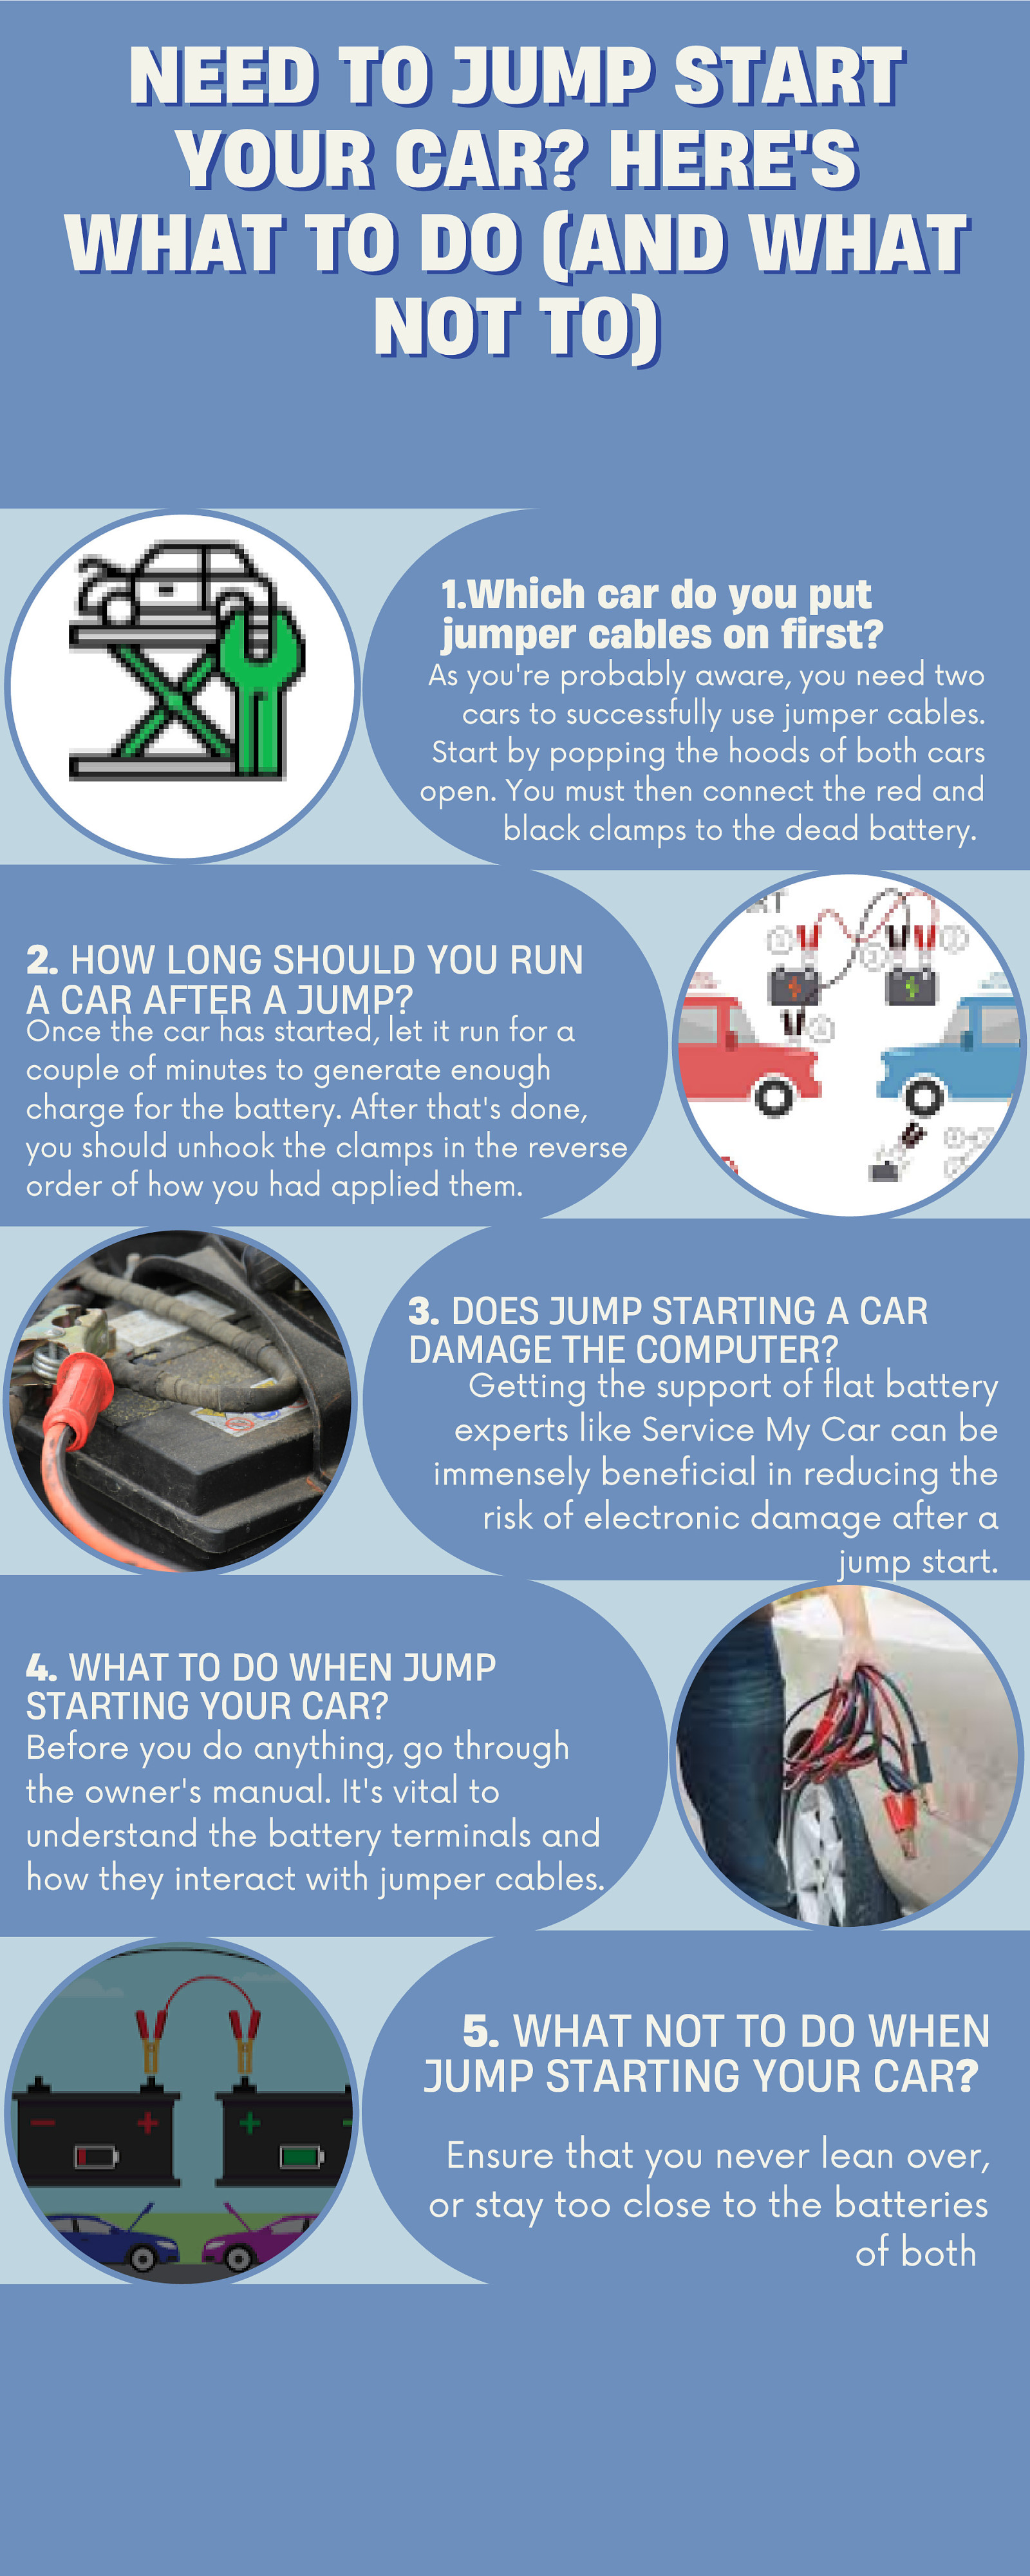 Need to Jump Start Your Car? Here’s What To Do (And What Not To)